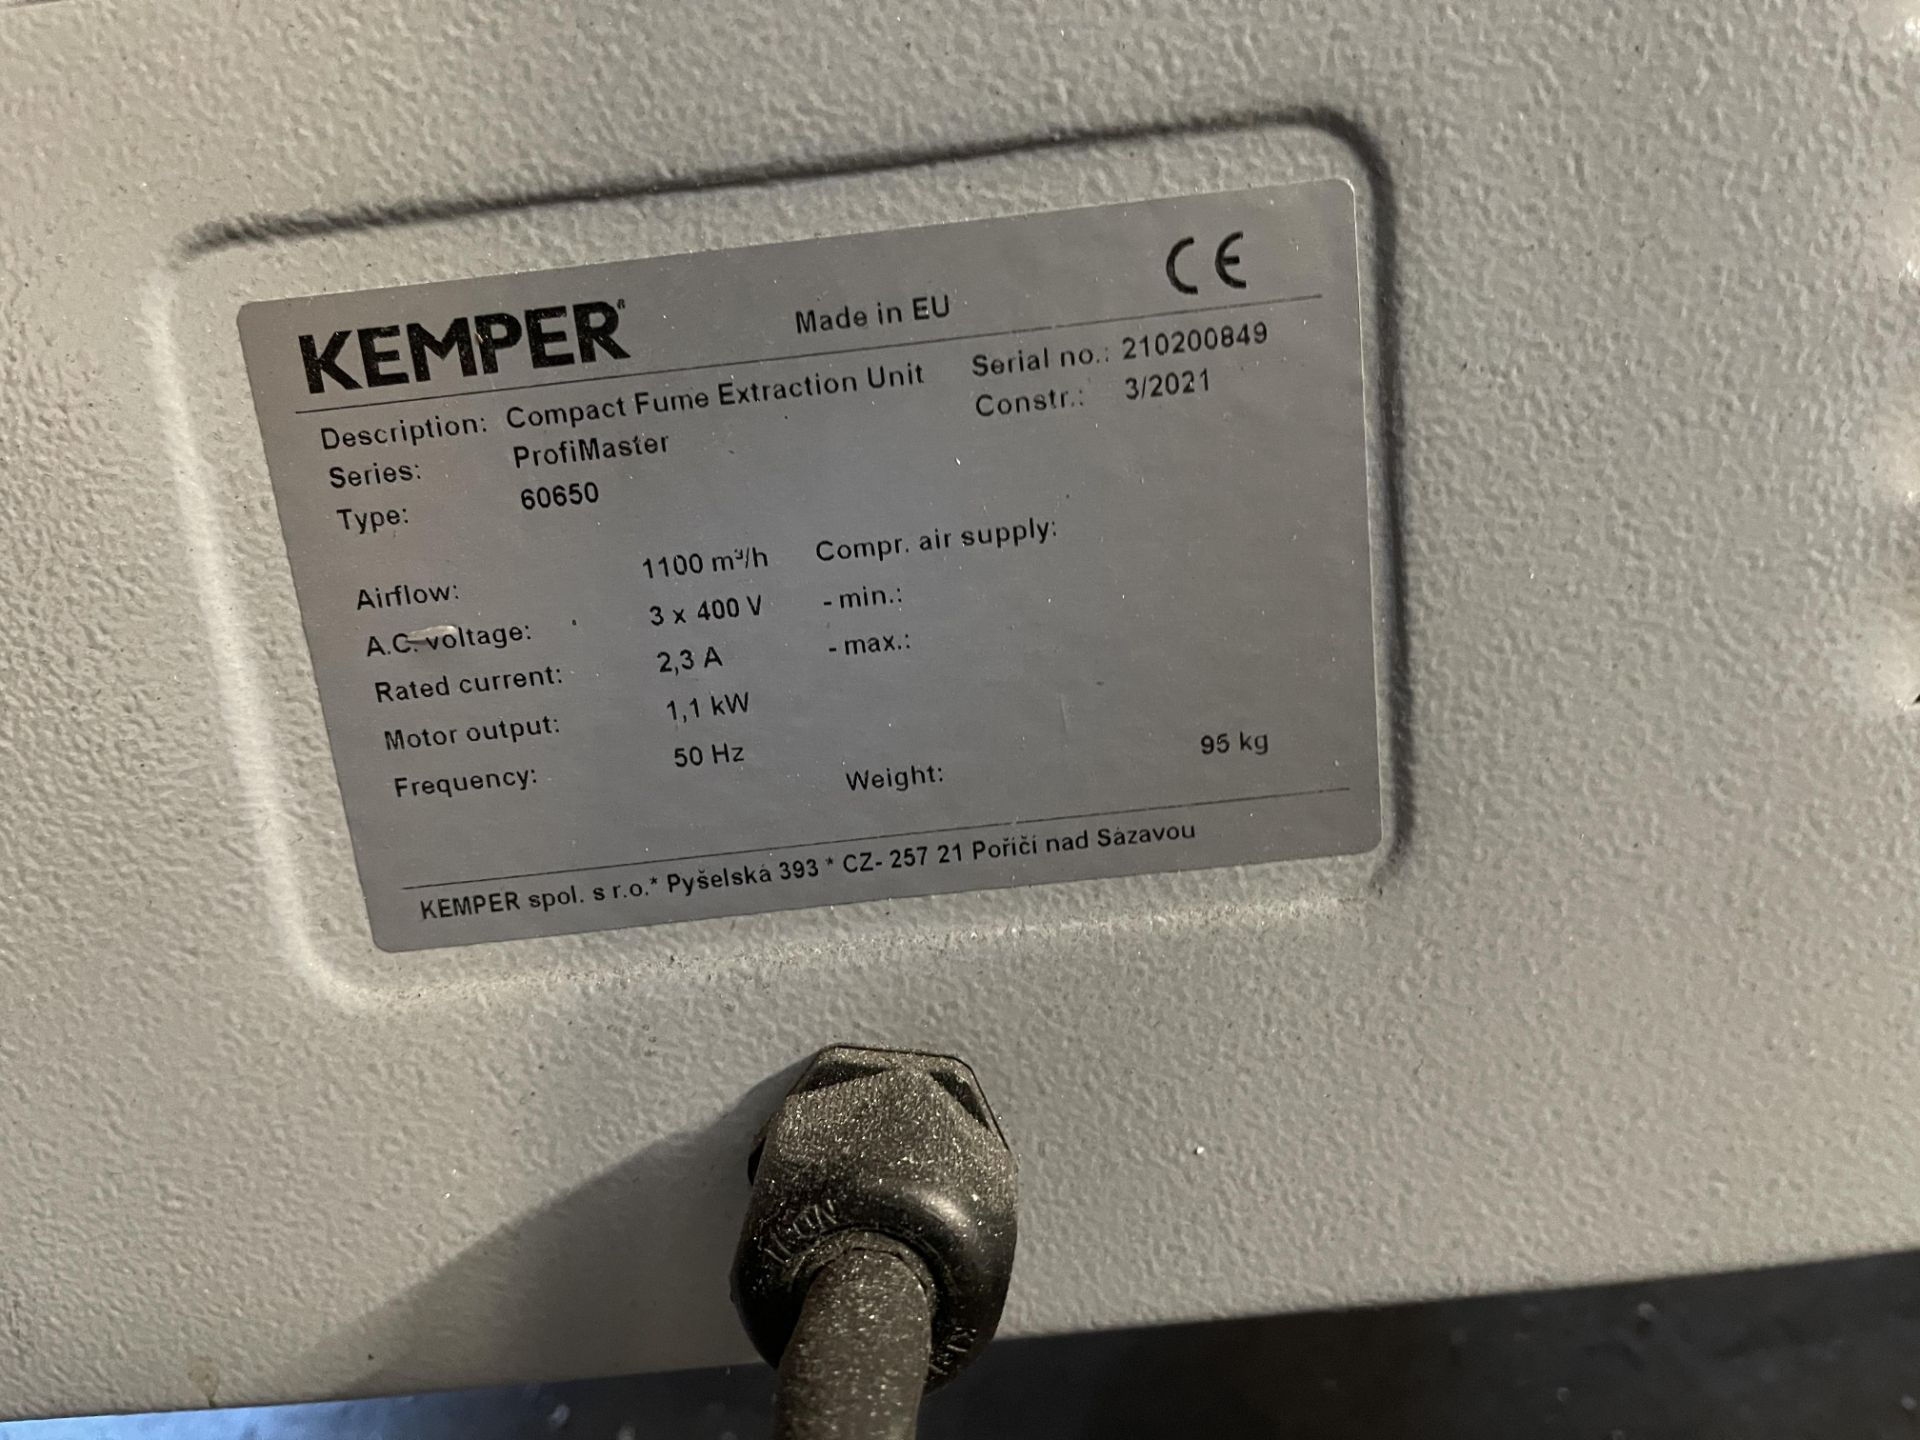 Kemper ProfiMaster Type 60650 Mobile Compact Fume Extraction Unit, Weight 95Kg, Serial No.210200849, - Image 6 of 6